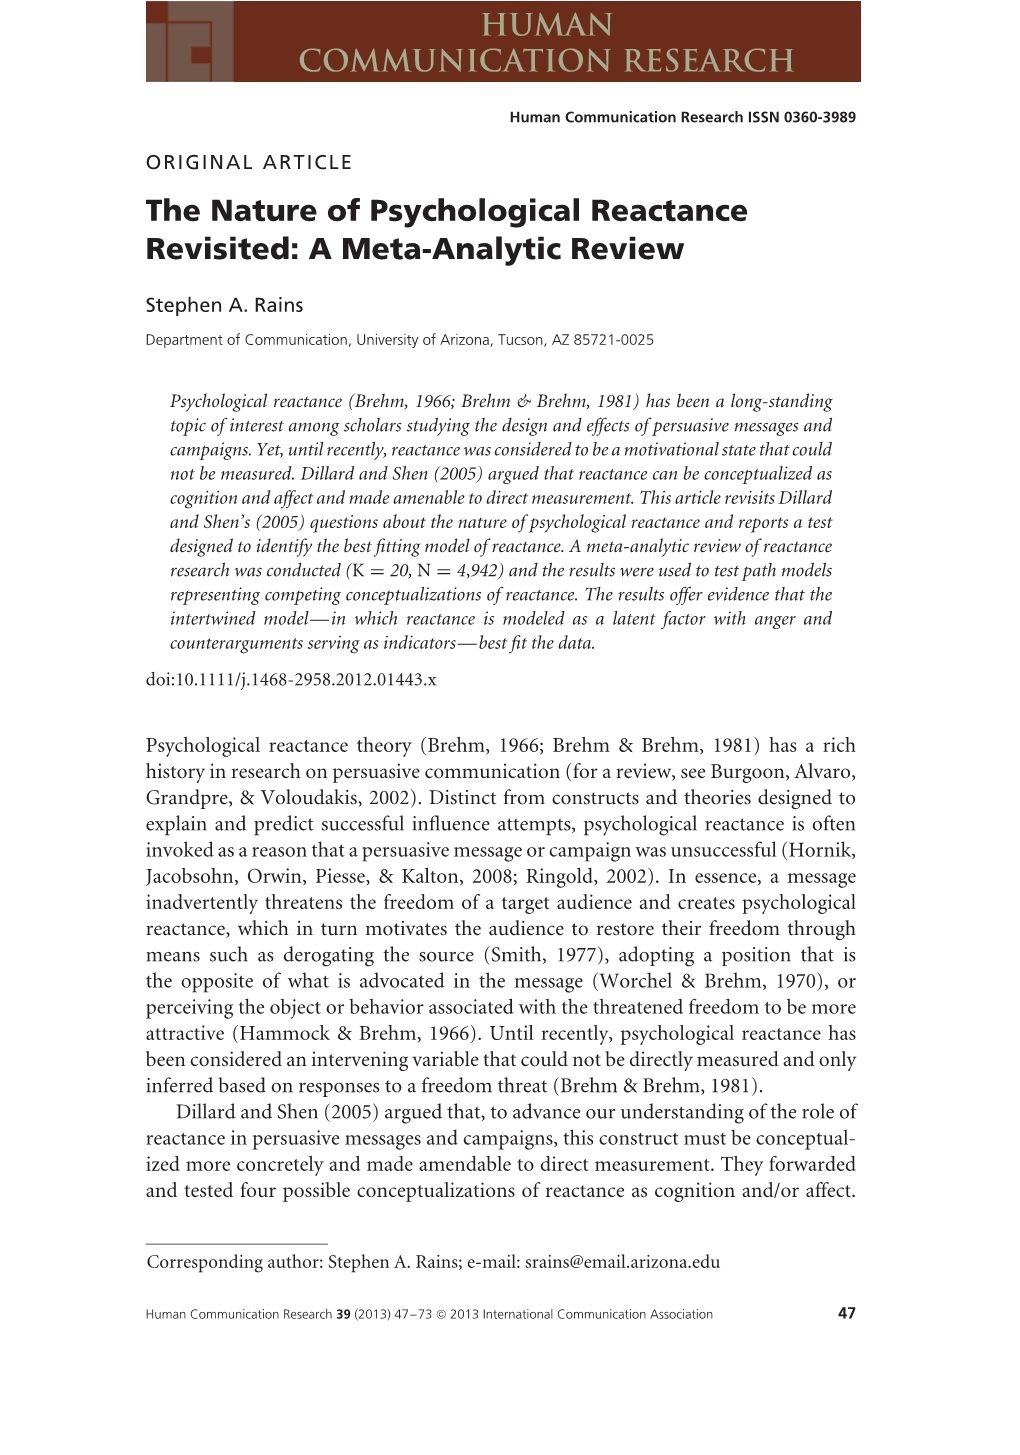 The Nature of Psychological Reactance Revisited: a Meta-Analytic Review